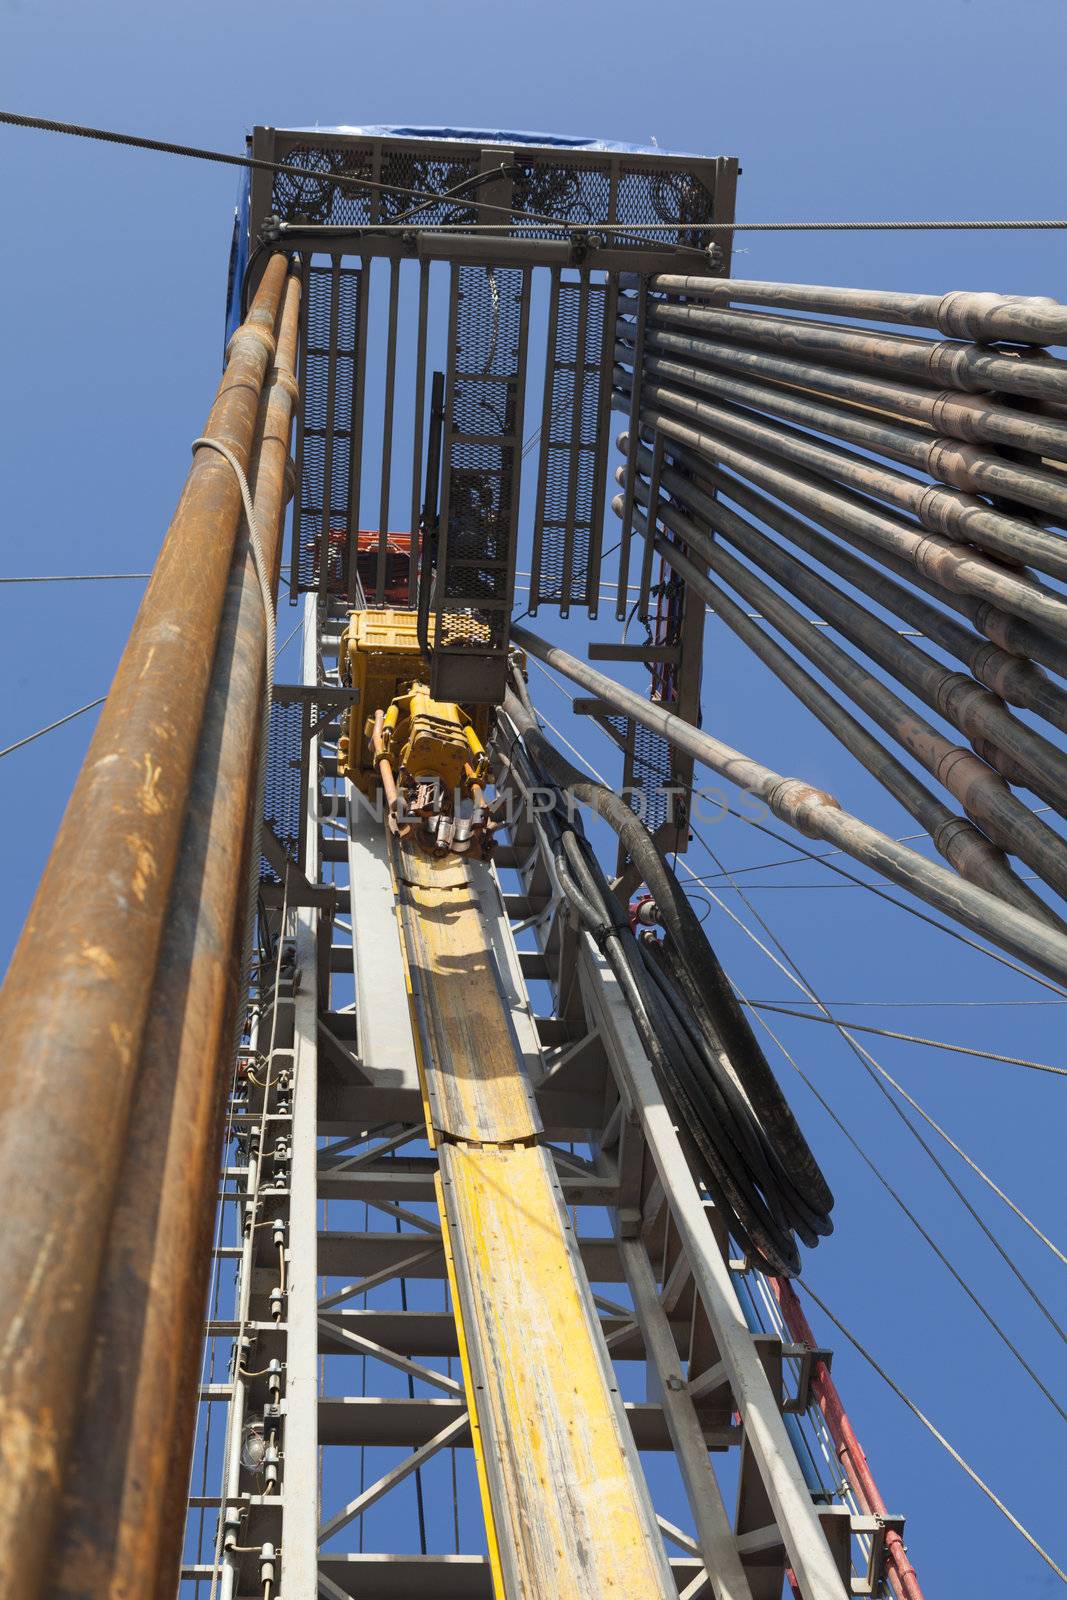 Rig station working in drilling operation